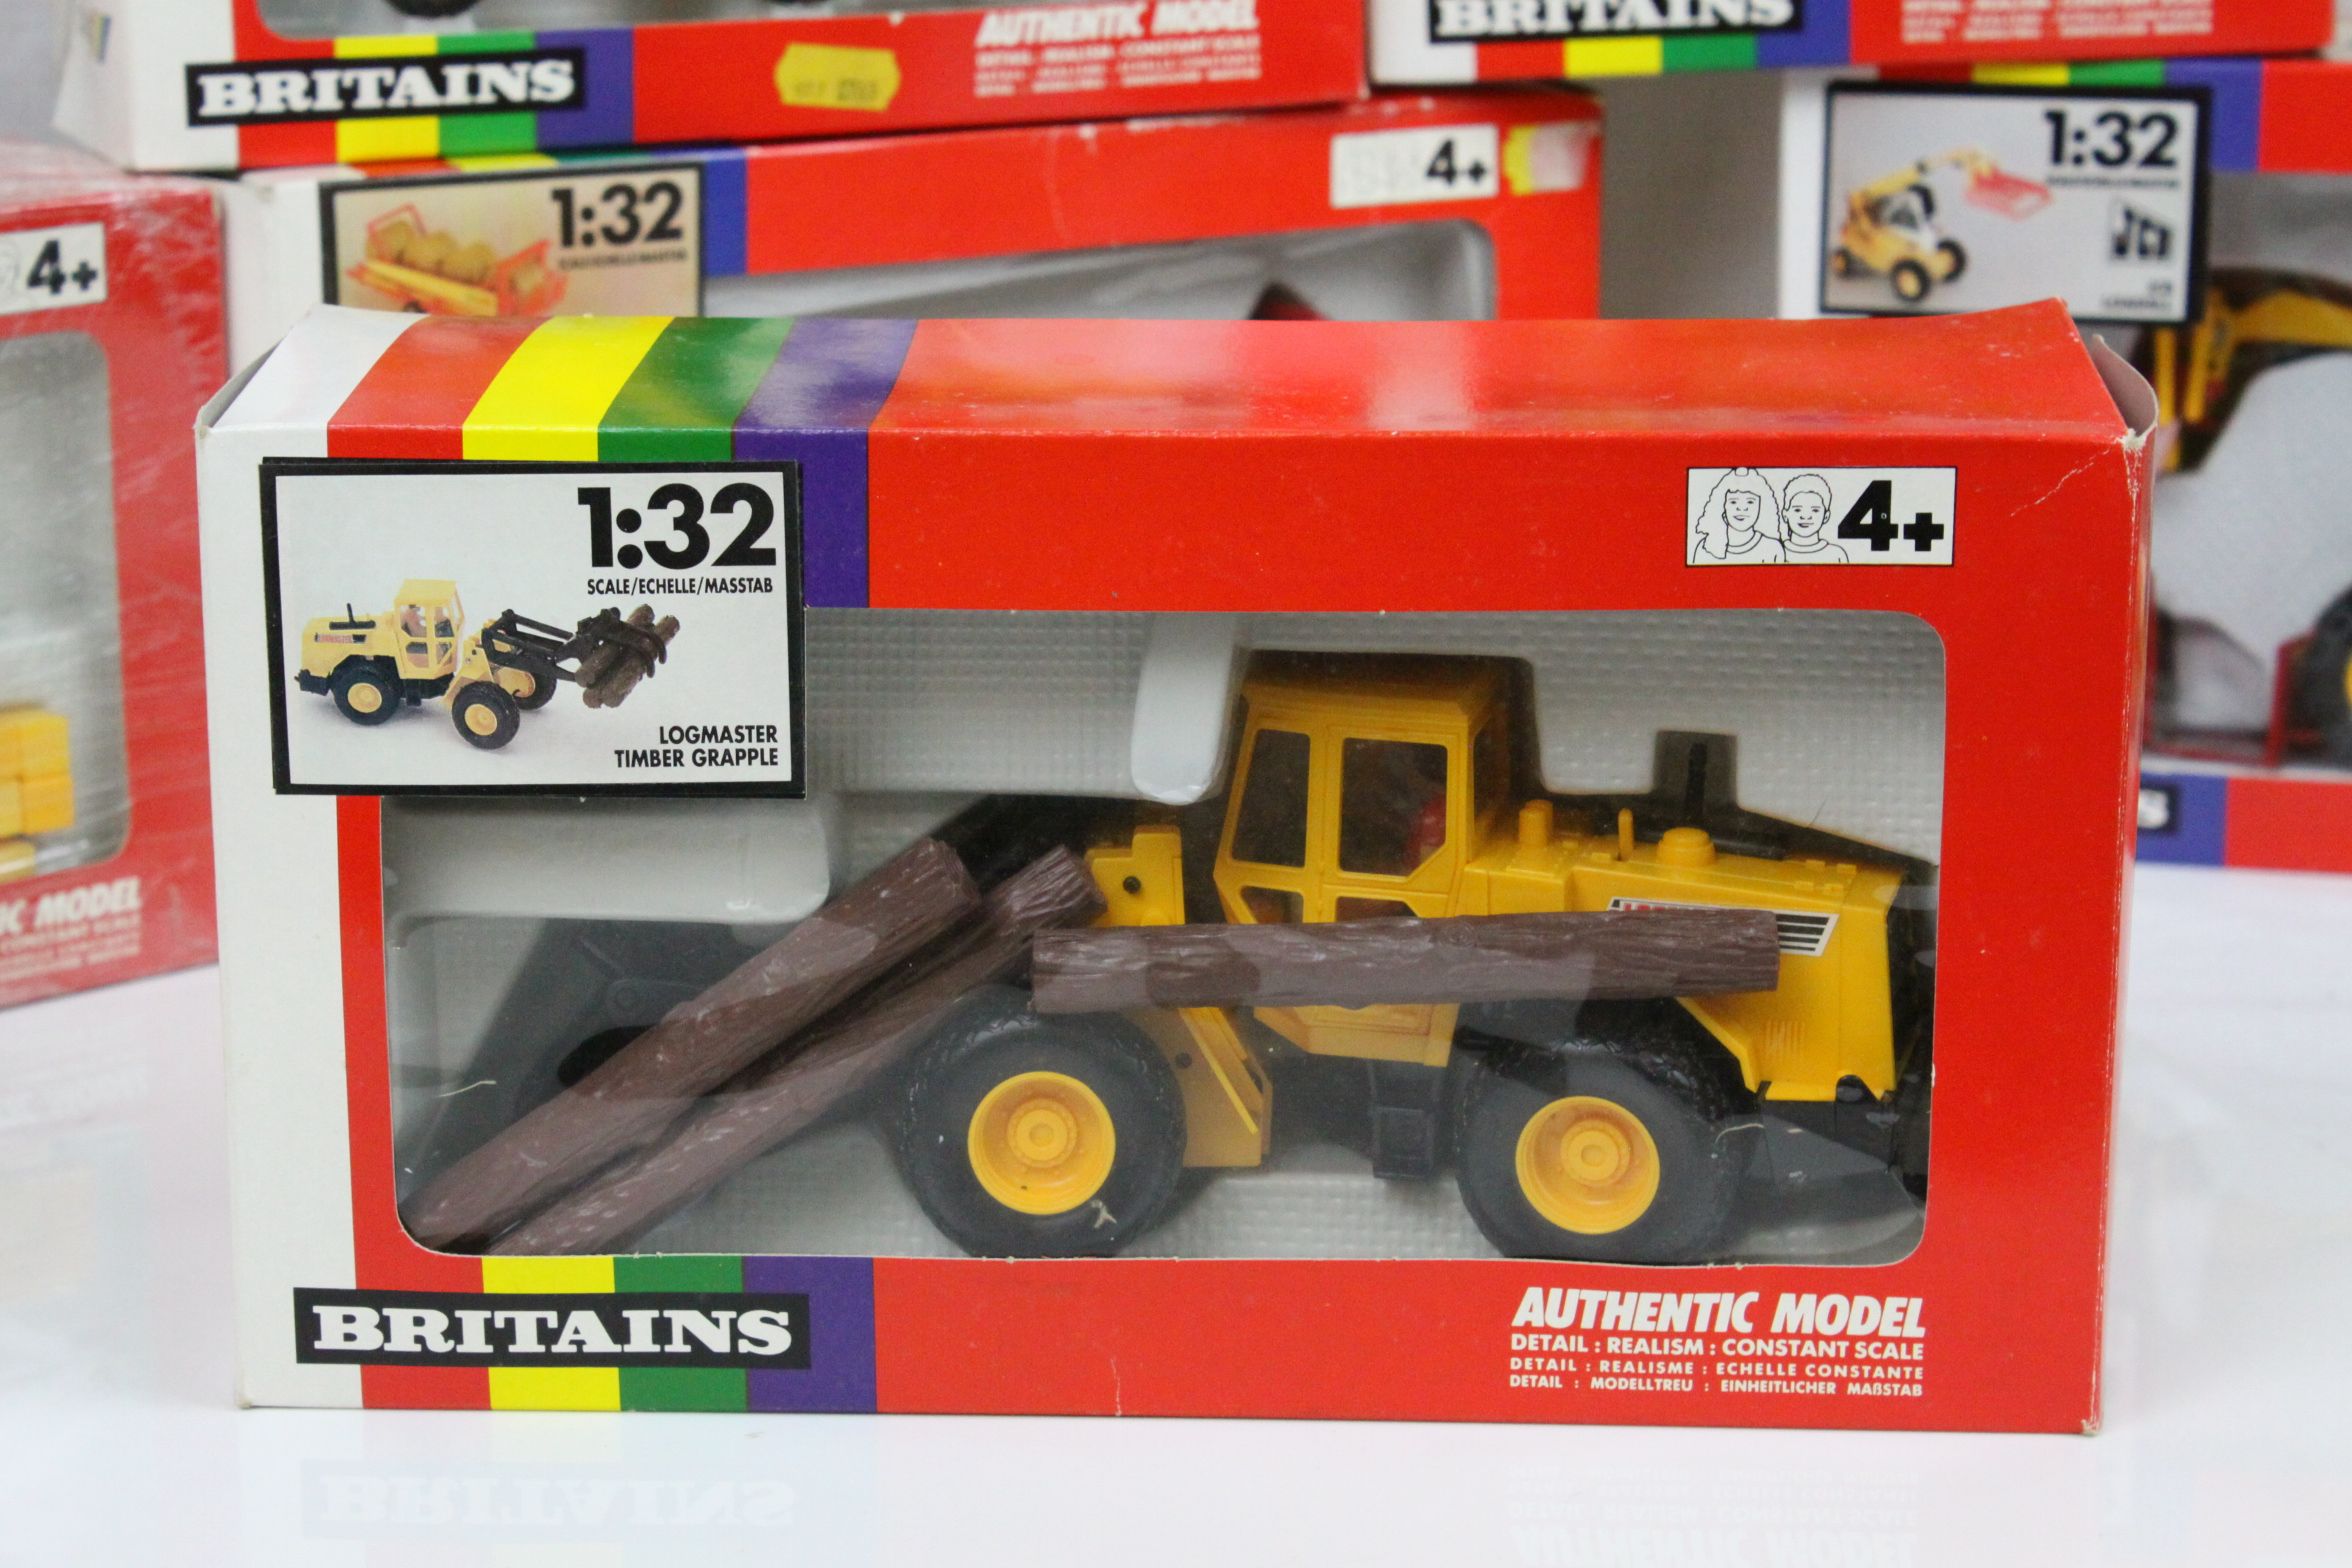 16 Boxed 1:32 Britains farming models to include 9566, 9559, 9539, 9548, 9547, 9574, 9509, 9519, - Image 16 of 27